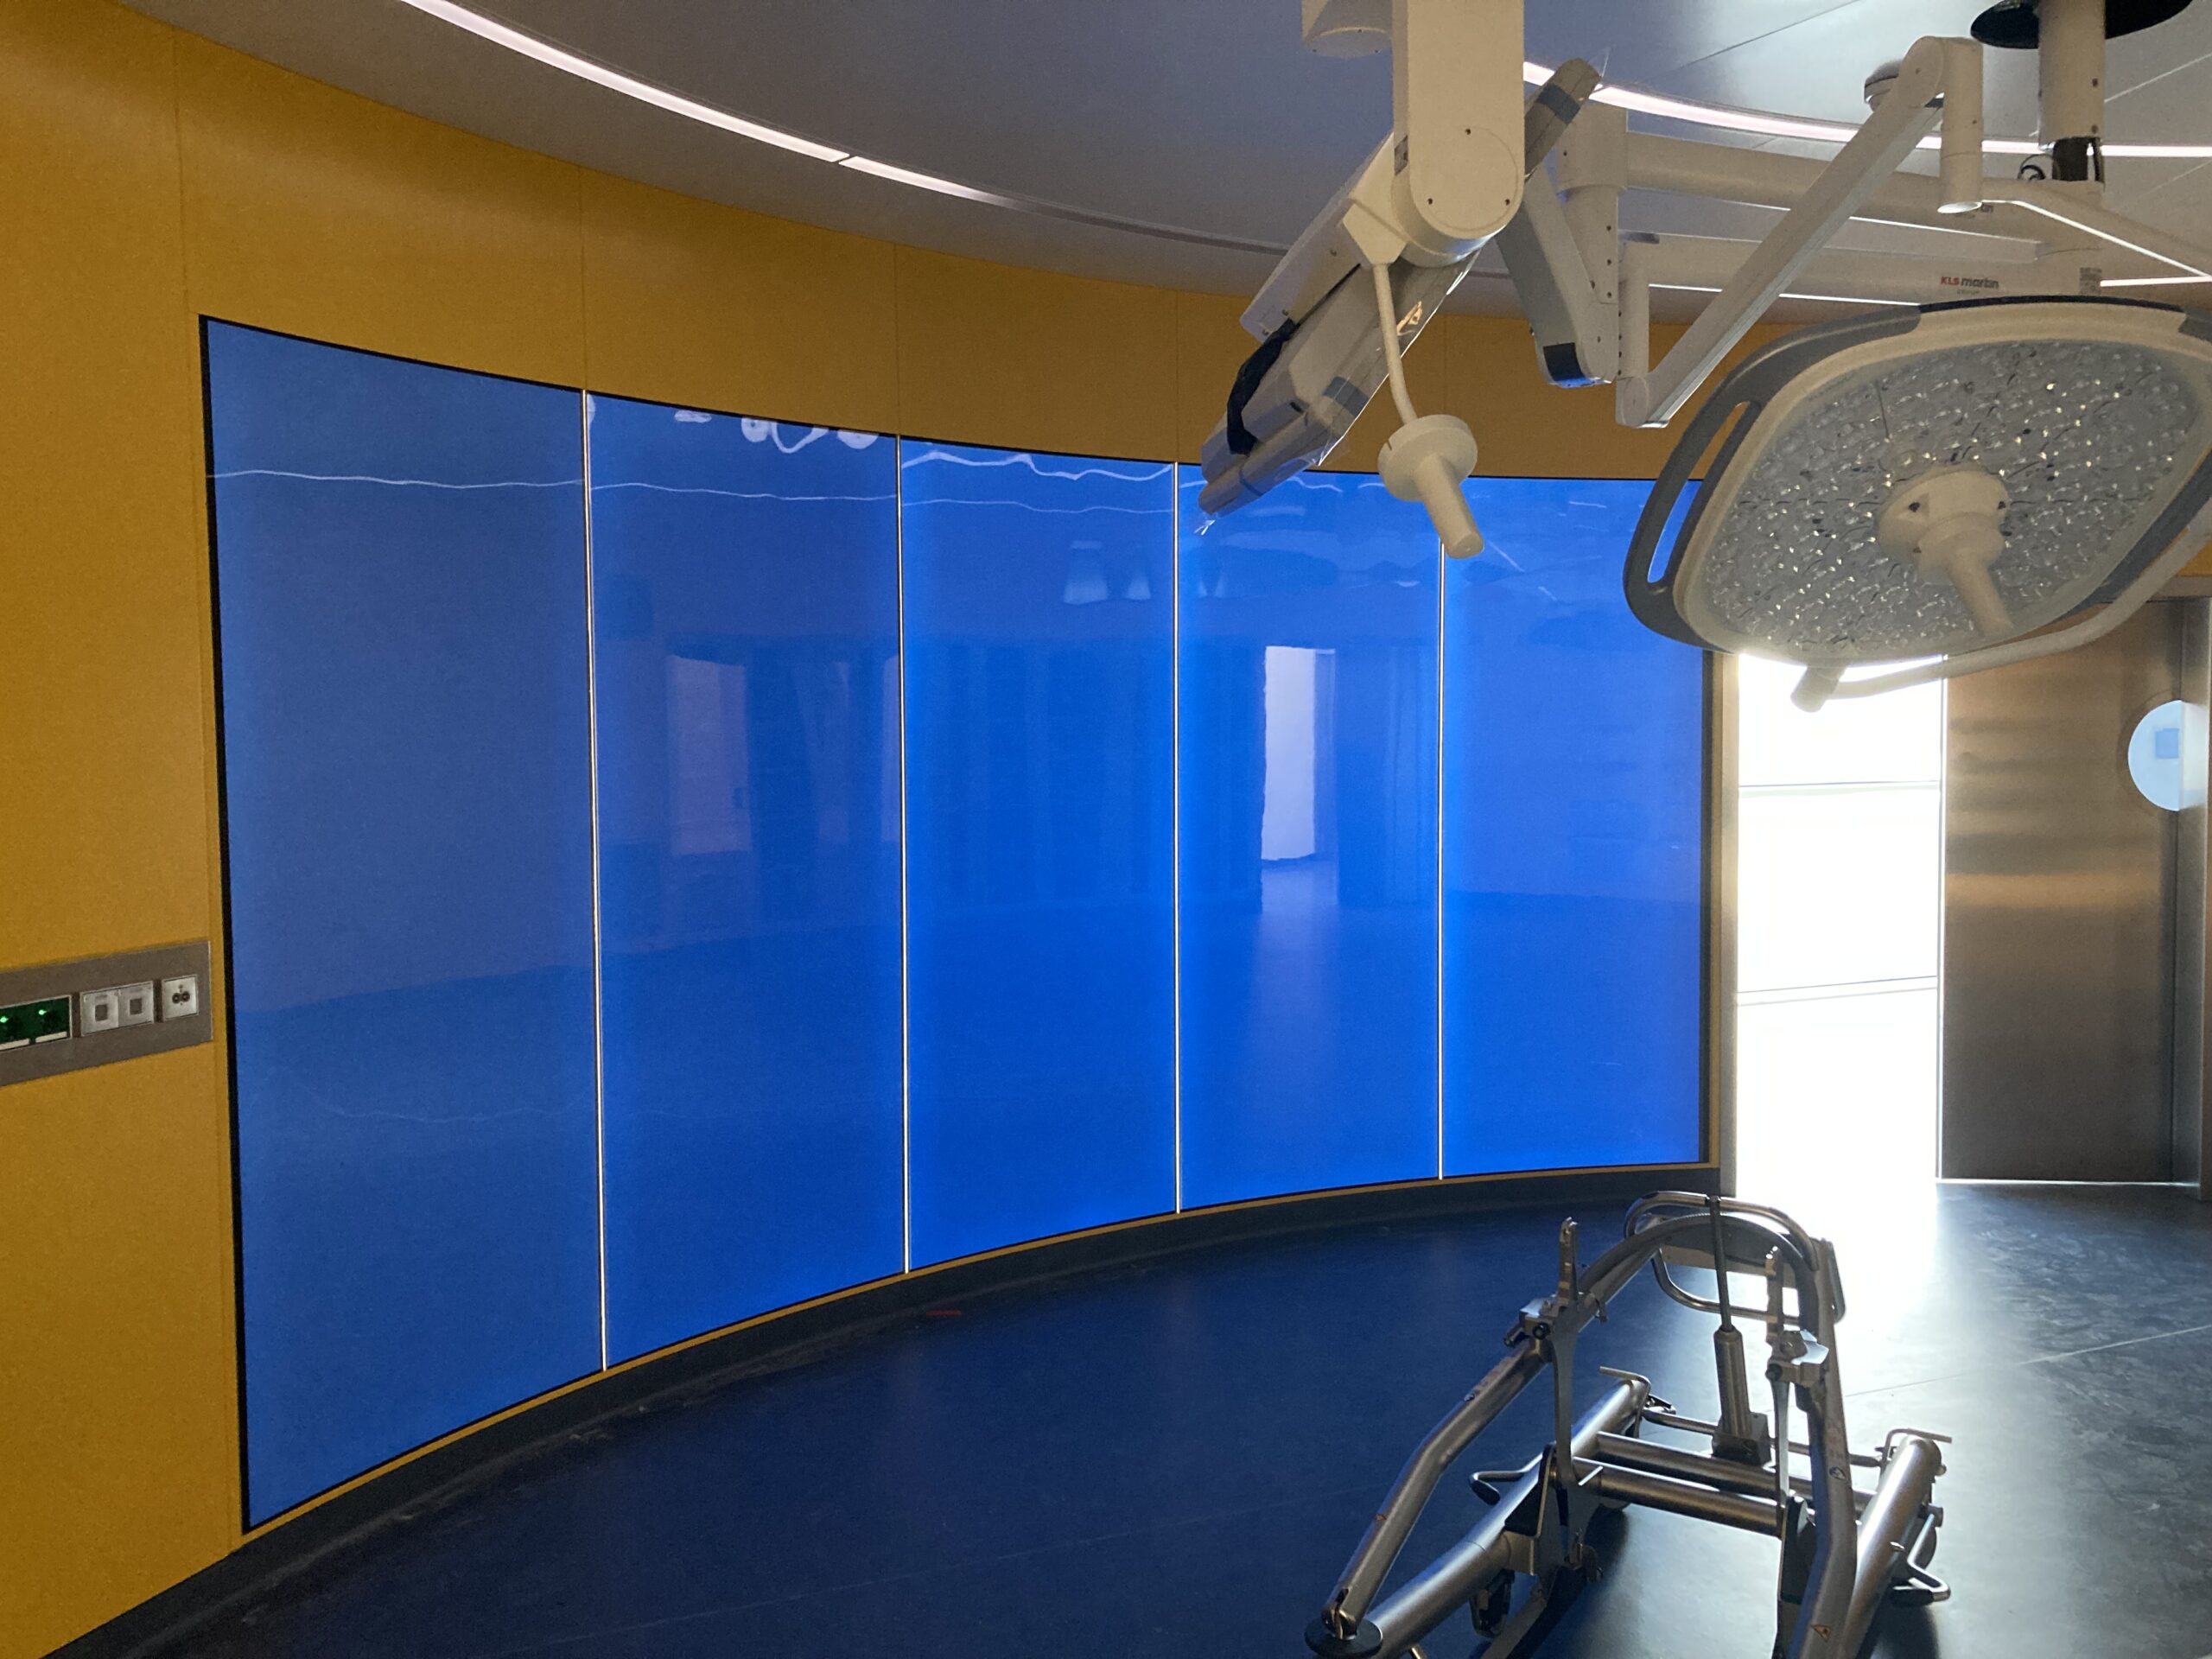 Hygienic Blackout Smart Glass delivers multi-state privacy in a surgery theatre, allowing this challenging healthcare setting to offer privacy when required..